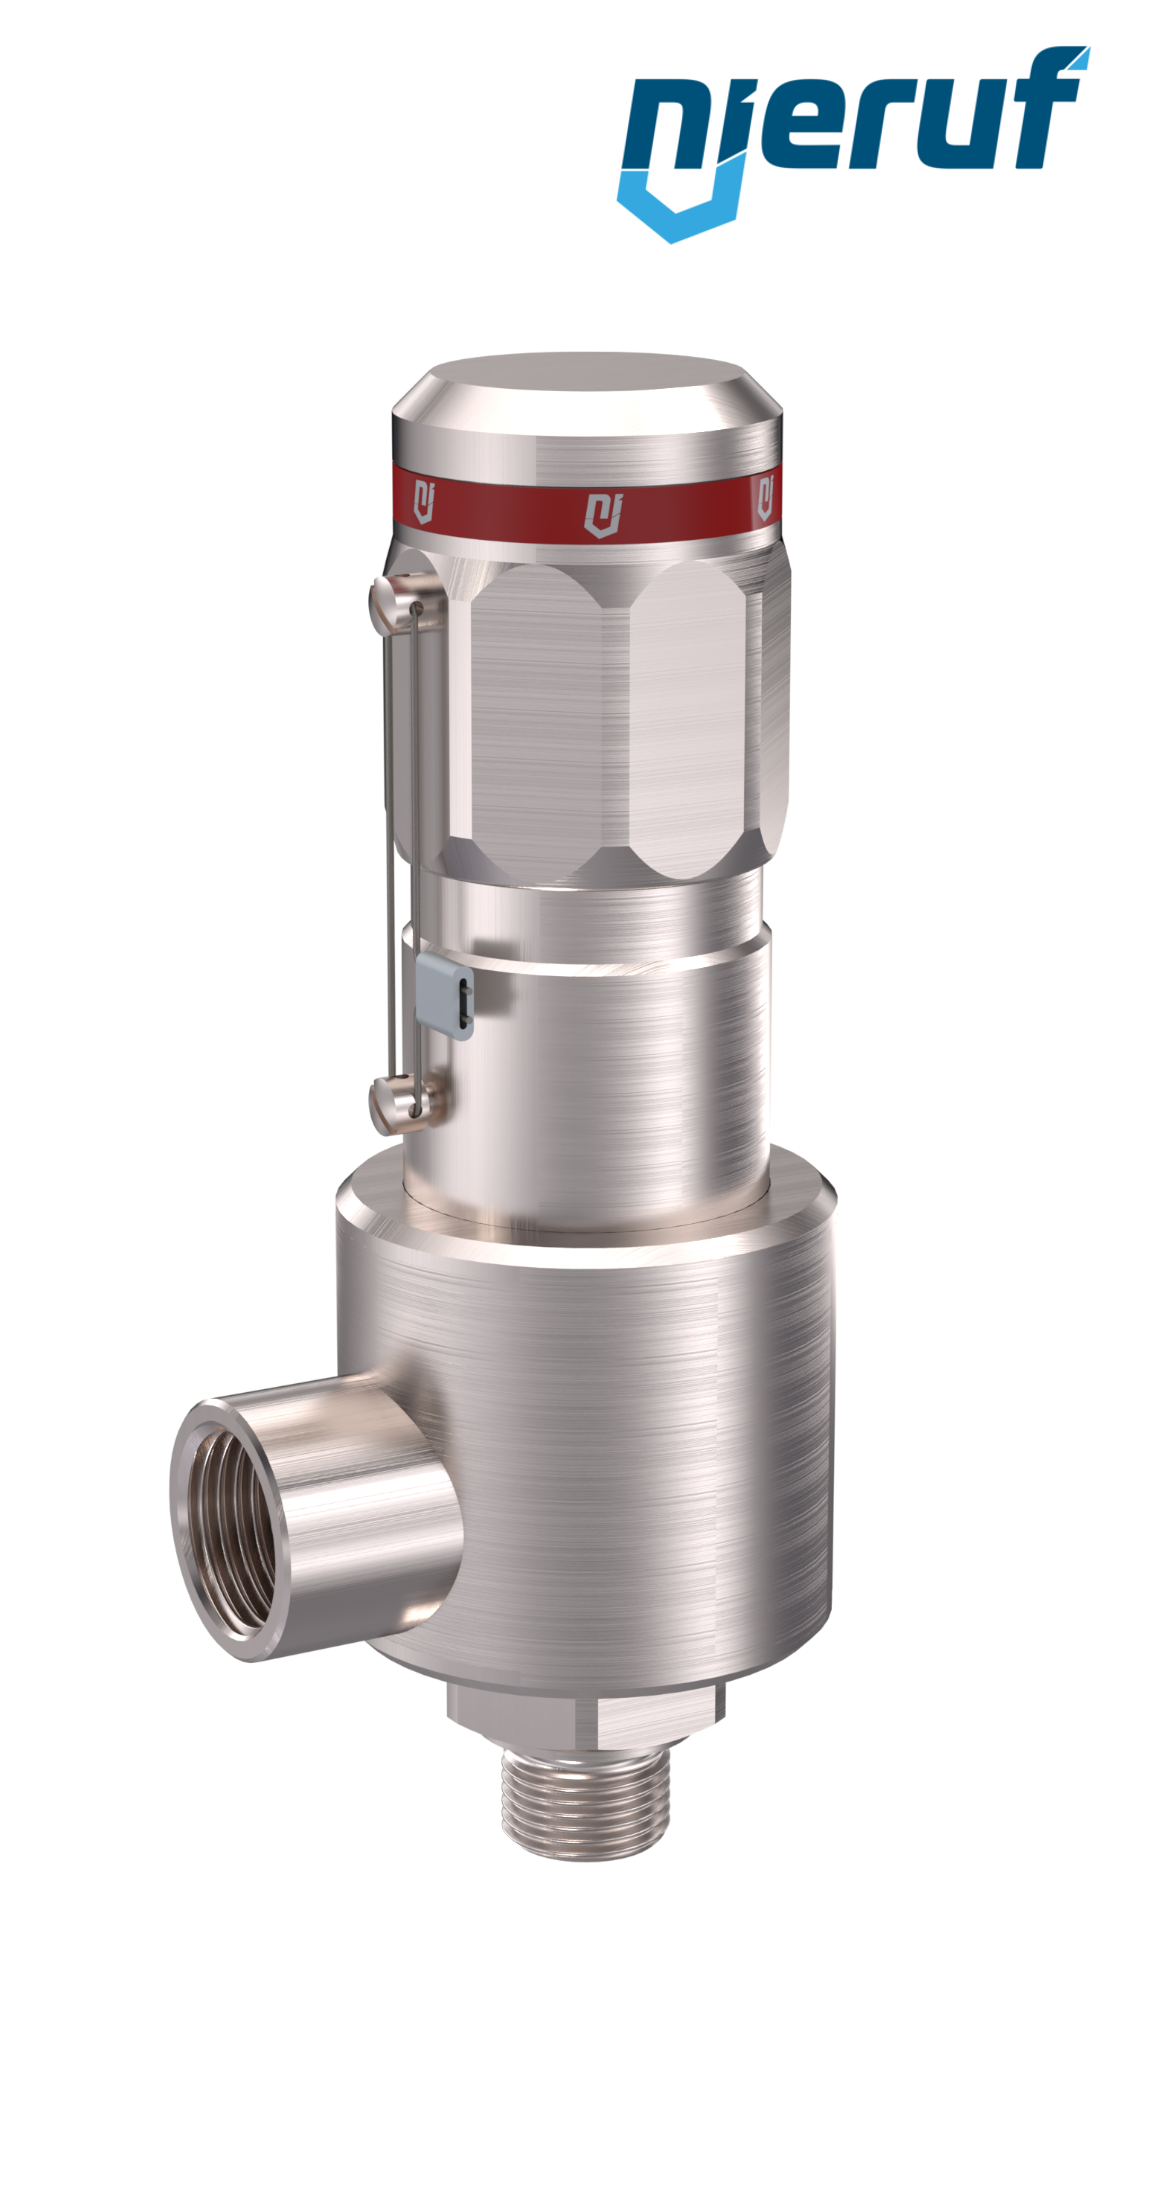 safety-valve DN10 1/4" m x 1/2" fm male thread NPT, SV15, MD / PAI, without lifting device, angle-type, >180,0 bar - 350,0 bar